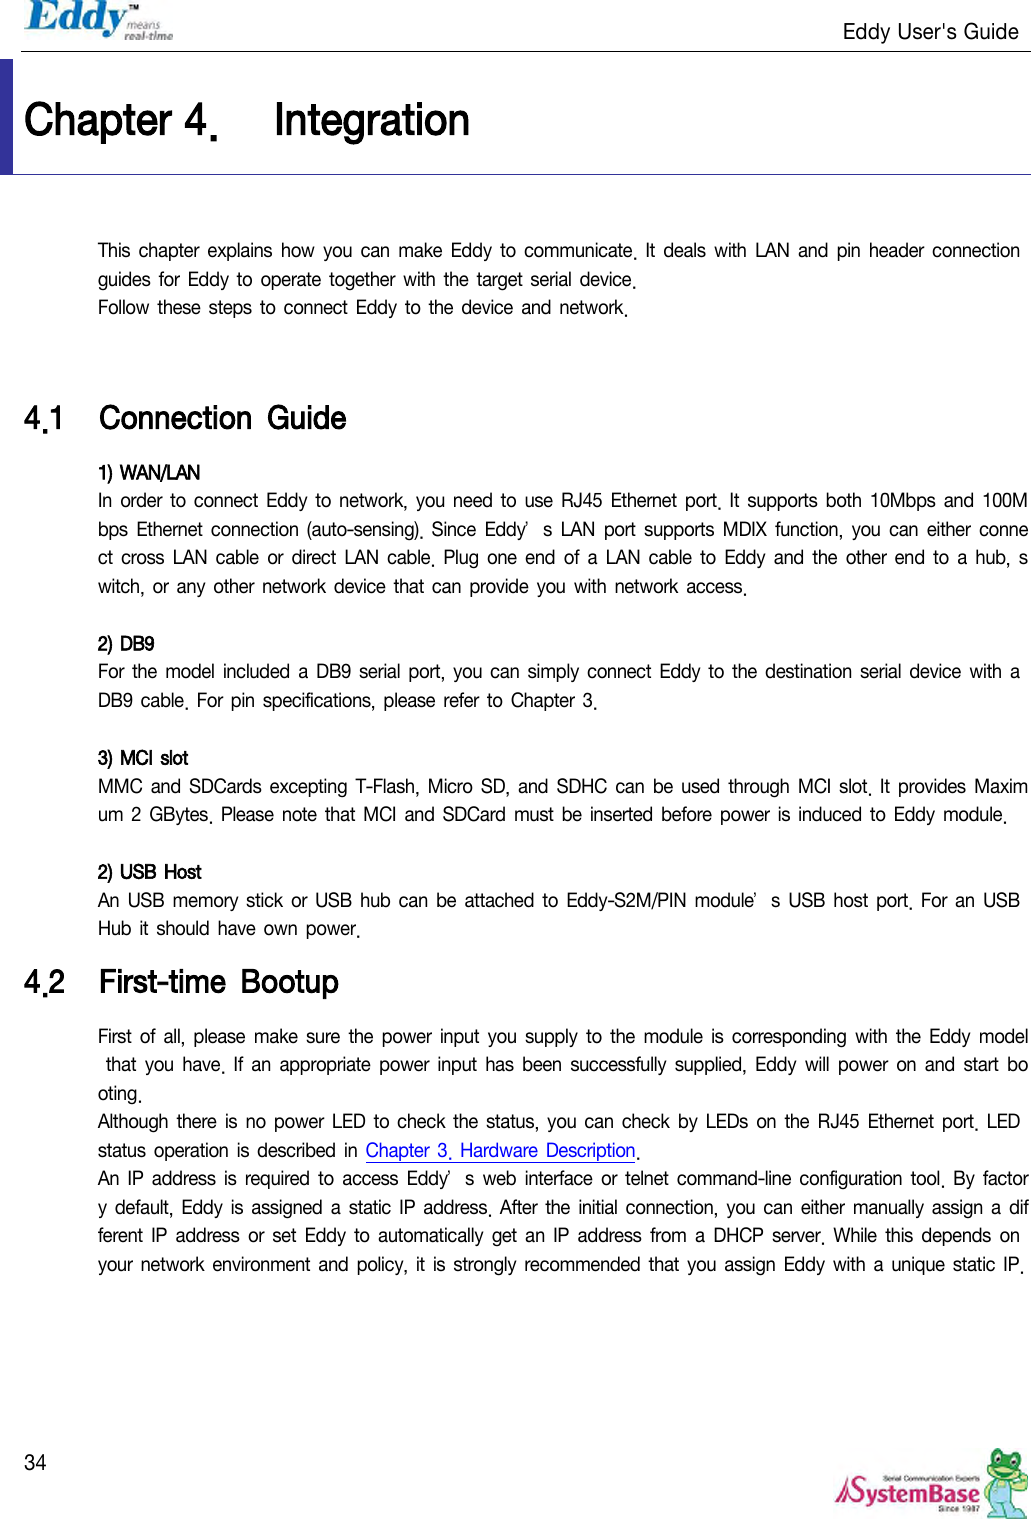                                                                   Eddy User&apos;s Guide   34 Chapter 4. Integration This chapter  explains  how  you  can make  Eddy to  communicate. It  deals  with  LAN and  pin header connection guides for Eddy to  operate  together  with the  target  serial device. Follow these steps to connect Eddy to the device and  network.   4.1 Connection  Guide 1) WAN/LAN In order  to connect Eddy to network, you need to  use RJ45  Ethernet port. It supports both 10Mbps and  100Mbps  Ethernet  connection (auto-sensing).  Since  Eddy’s  LAN  port  supports MDIX  function,  you can either  connect  cross LAN cable  or  direct  LAN cable. Plug  one end  of a LAN  cable to  Eddy  and the other end  to  a hub,  switch,  or any  other network  device  that can  provide  you with network access.  2) DB9 For the model  included a DB9 serial port,  you can simply connect Eddy to the destination serial device  with a DB9 cable.  For pin specifications,  please  refer to Chapter  3.   3) MCI slot MMC  and SDCards excepting T-Flash, Micro  SD, and SDHC can  be  used through MCI slot. It  provides Maximum 2  GBytes.  Please  note that MCI and  SDCard must  be inserted before  power is induced to Eddy module.  2) USB Host An USB memory stick or  USB  hub can be attached to  Eddy-S2M/PIN  module’s  USB host  port. For an  USB Hub it should  have own power. 4.2 First-time  Bootup First  of  all, please  make  sure  the power  input  you supply  to the module is corresponding  with the Eddy model that  you have. If  an  appropriate power  input has  been  successfully  supplied, Eddy will  power  on  and  start booting.  Although  there is  no  power LED to  check the status, you can check by  LEDs on  the RJ45  Ethernet port.  LED status  operation is described in  Chapter 3.  Hardware Description. An IP  address is  required to  access Eddy’s  web  interface  or telnet command-line  configuration  tool. By  factory default, Eddy  is assigned a static  IP address.  After  the initial connection, you  can either  manually  assign  a different IP  address or set Eddy to automatically  get an IP  address  from a  DHCP  server.  While  this depends on your network environment and policy, it is  strongly  recommended that you assign  Eddy with a unique static IP. 